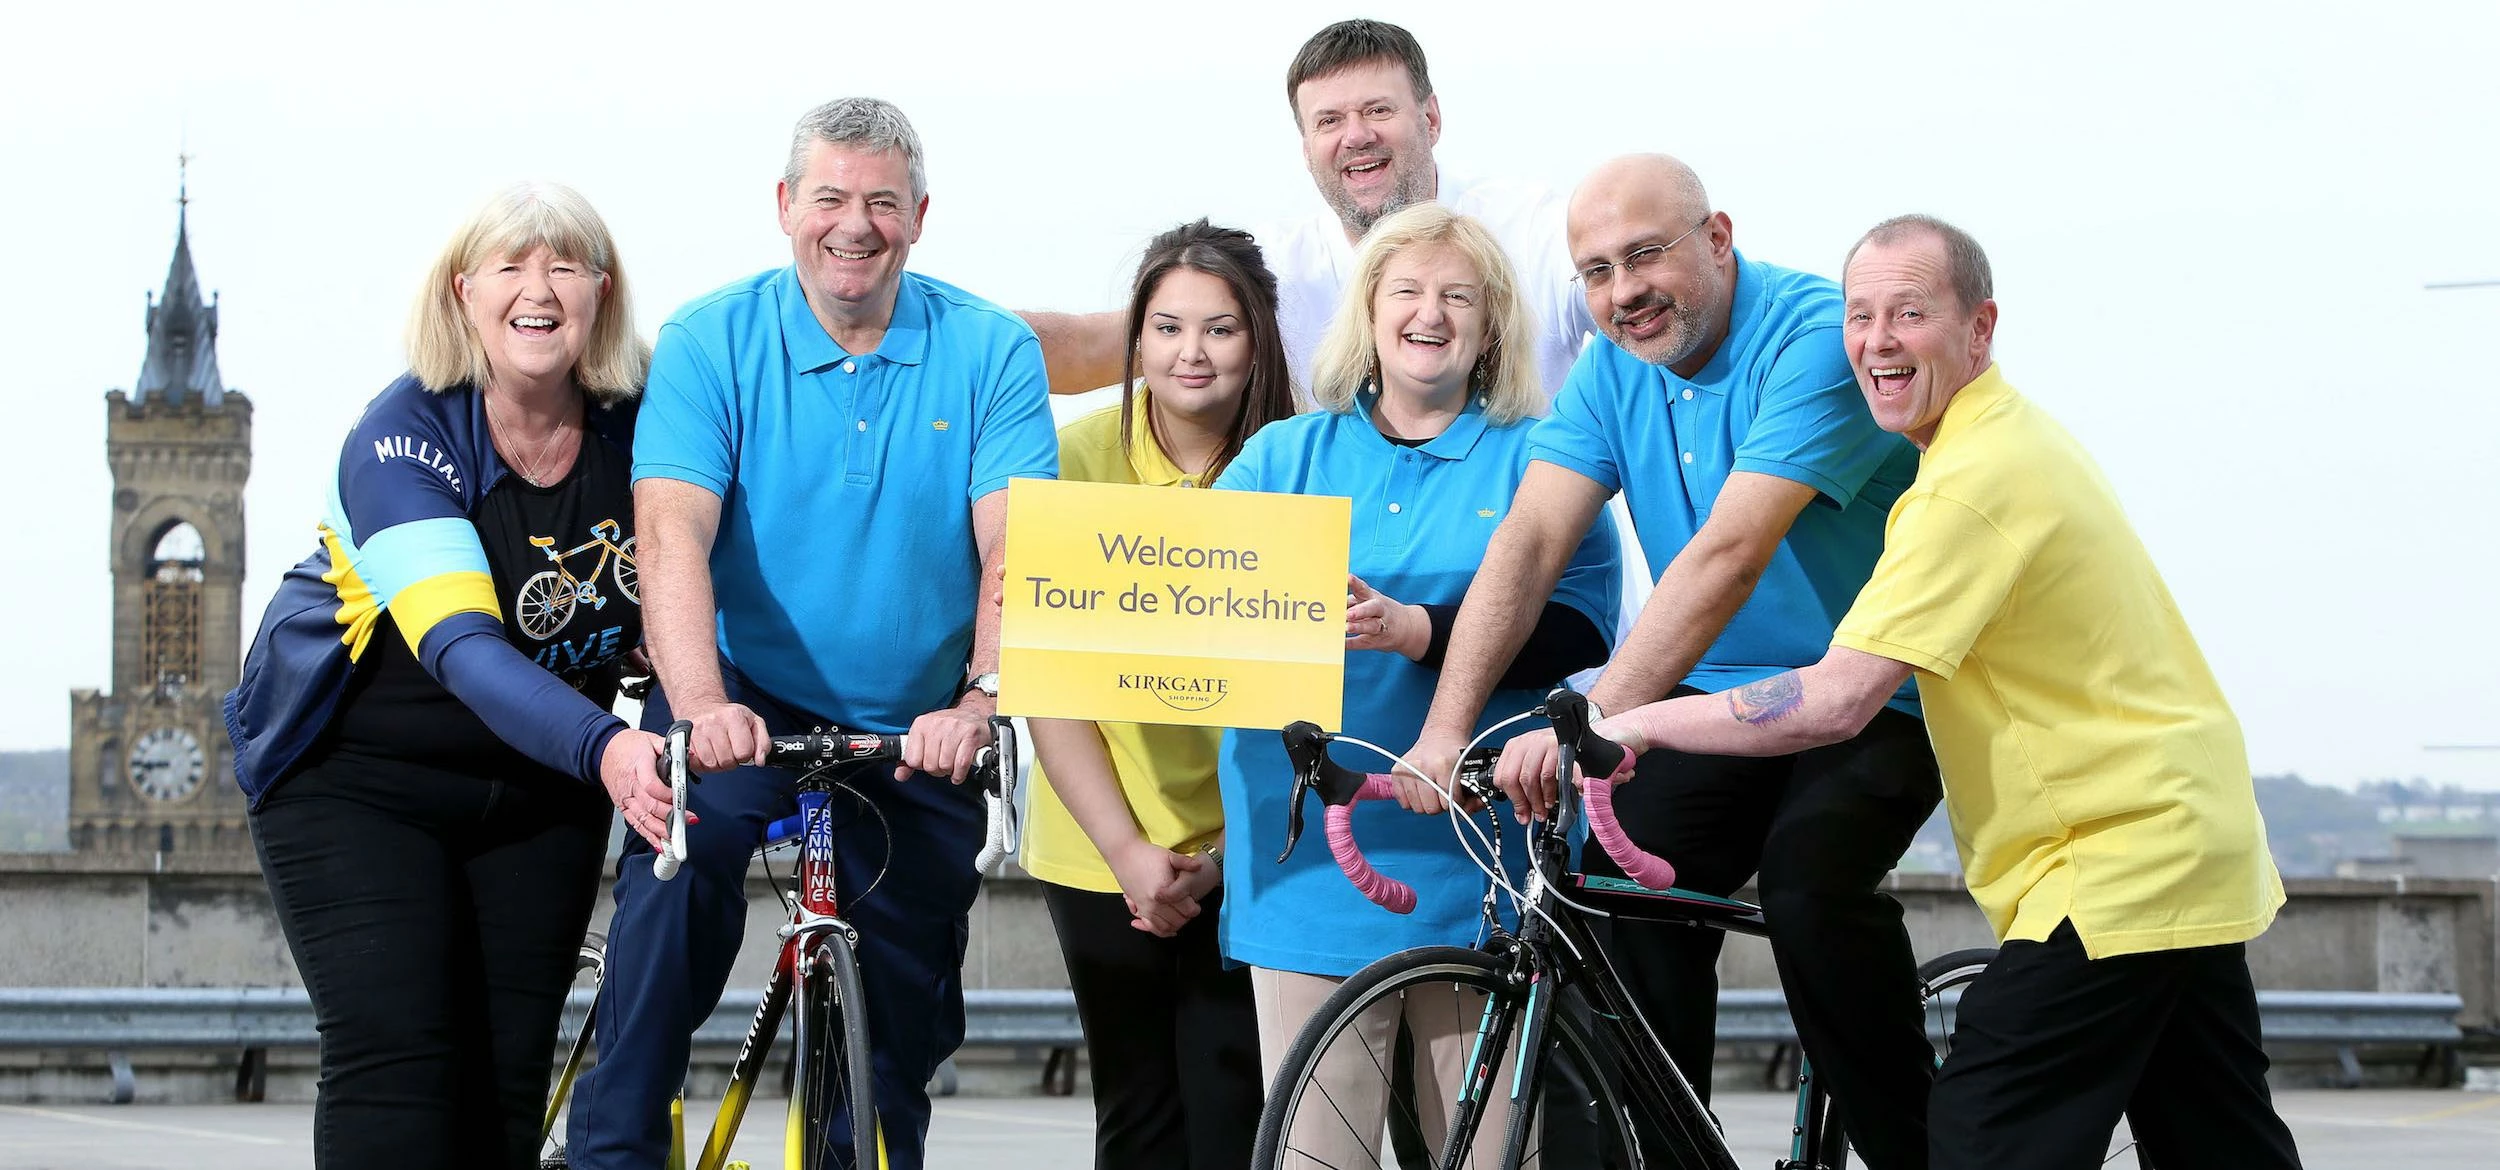 Kirkgate Shopping staff and Pennine Cycles "wheelie excited" for Tour de Yorkshire